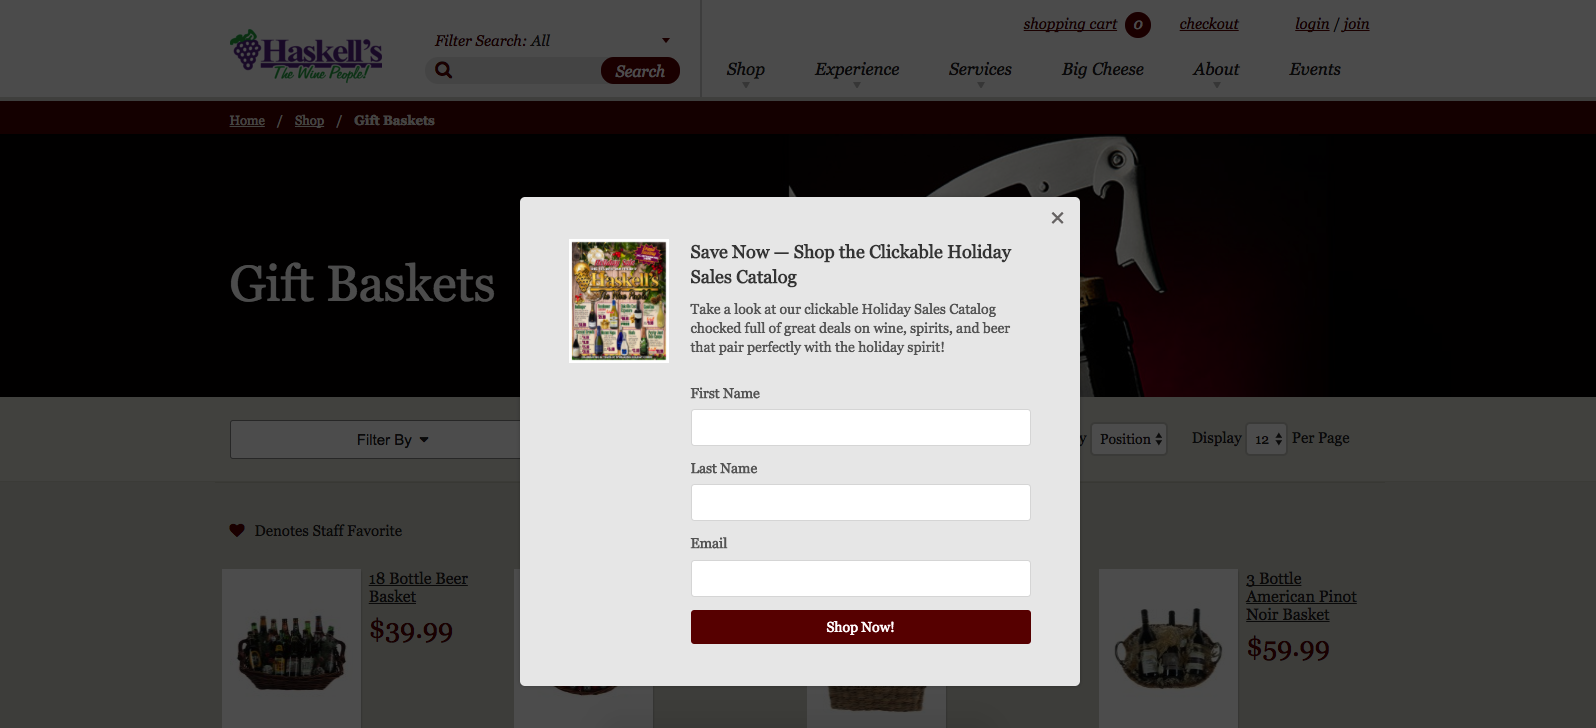 5 Stellar Pop-Up and Overlay CTAs that Convert (and a Few That Don't)